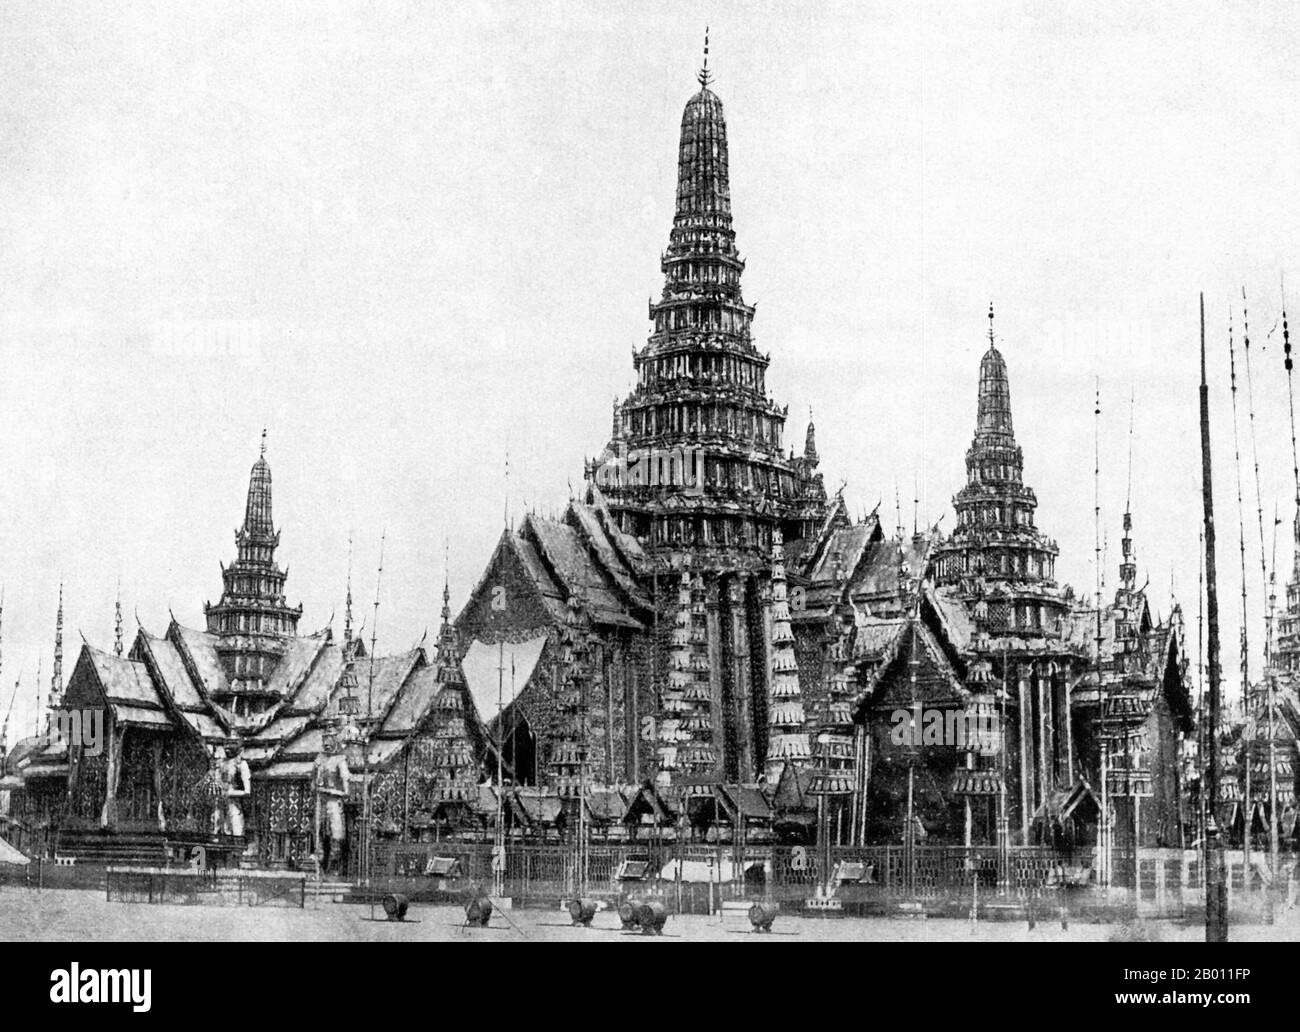 Thailand: The temple and pavilions constructed for the cremation ceremony of King Mongkut (Rama IV) in Bangkok in 1868.  Situated in front of the Grand Palace in central Bangkok, this 60m temple was constructed for the cremation of King Mongkut (r. 1851—68) who died of malaria after a trip to Prachuap Khiri Khan province to witness a total solar eclipse. Known as Mount Meru, after the sacred mountain in Hindu and Buddhist cosmology, to symbolise the king's divinity, the temple was decorated in gold and mirror glass, and surrounded by eight spired chedis marking the eight points on the compass. Stock Photo